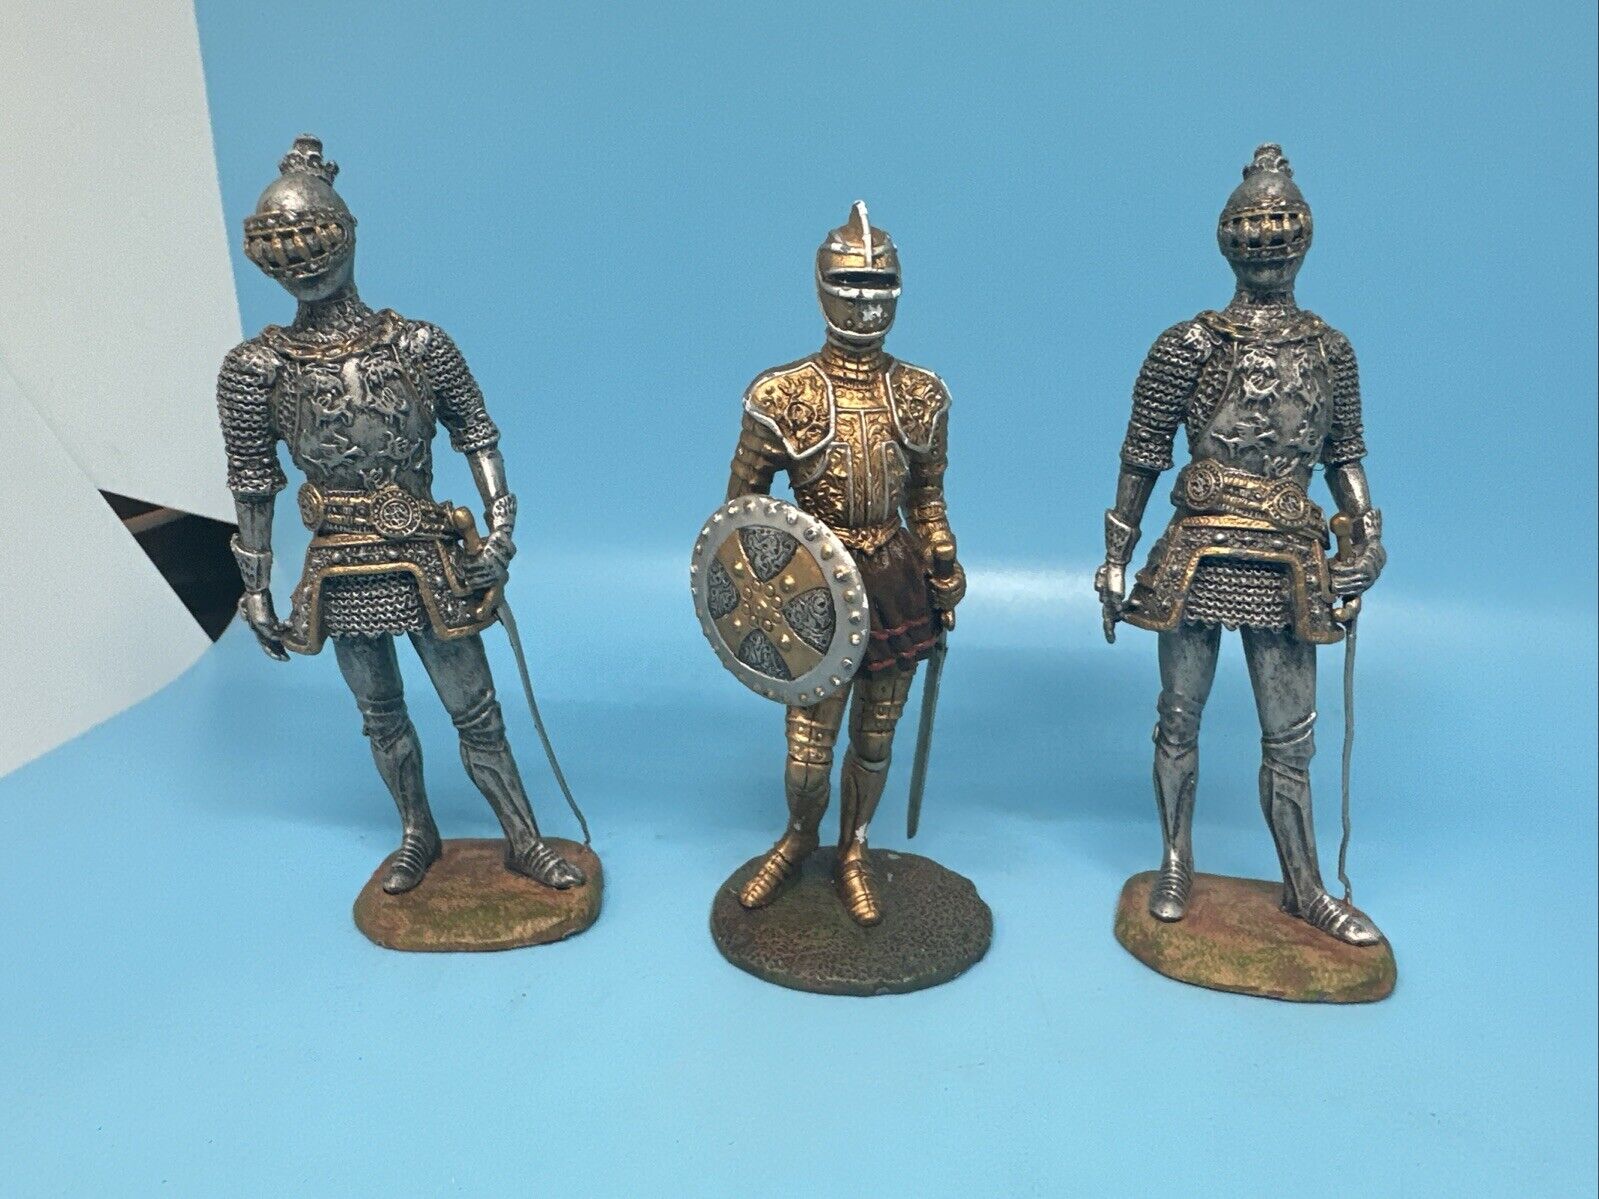 2002 Veronese Medieval Knight 2 Male, 1 Female Pewter Figurines (Stamped)